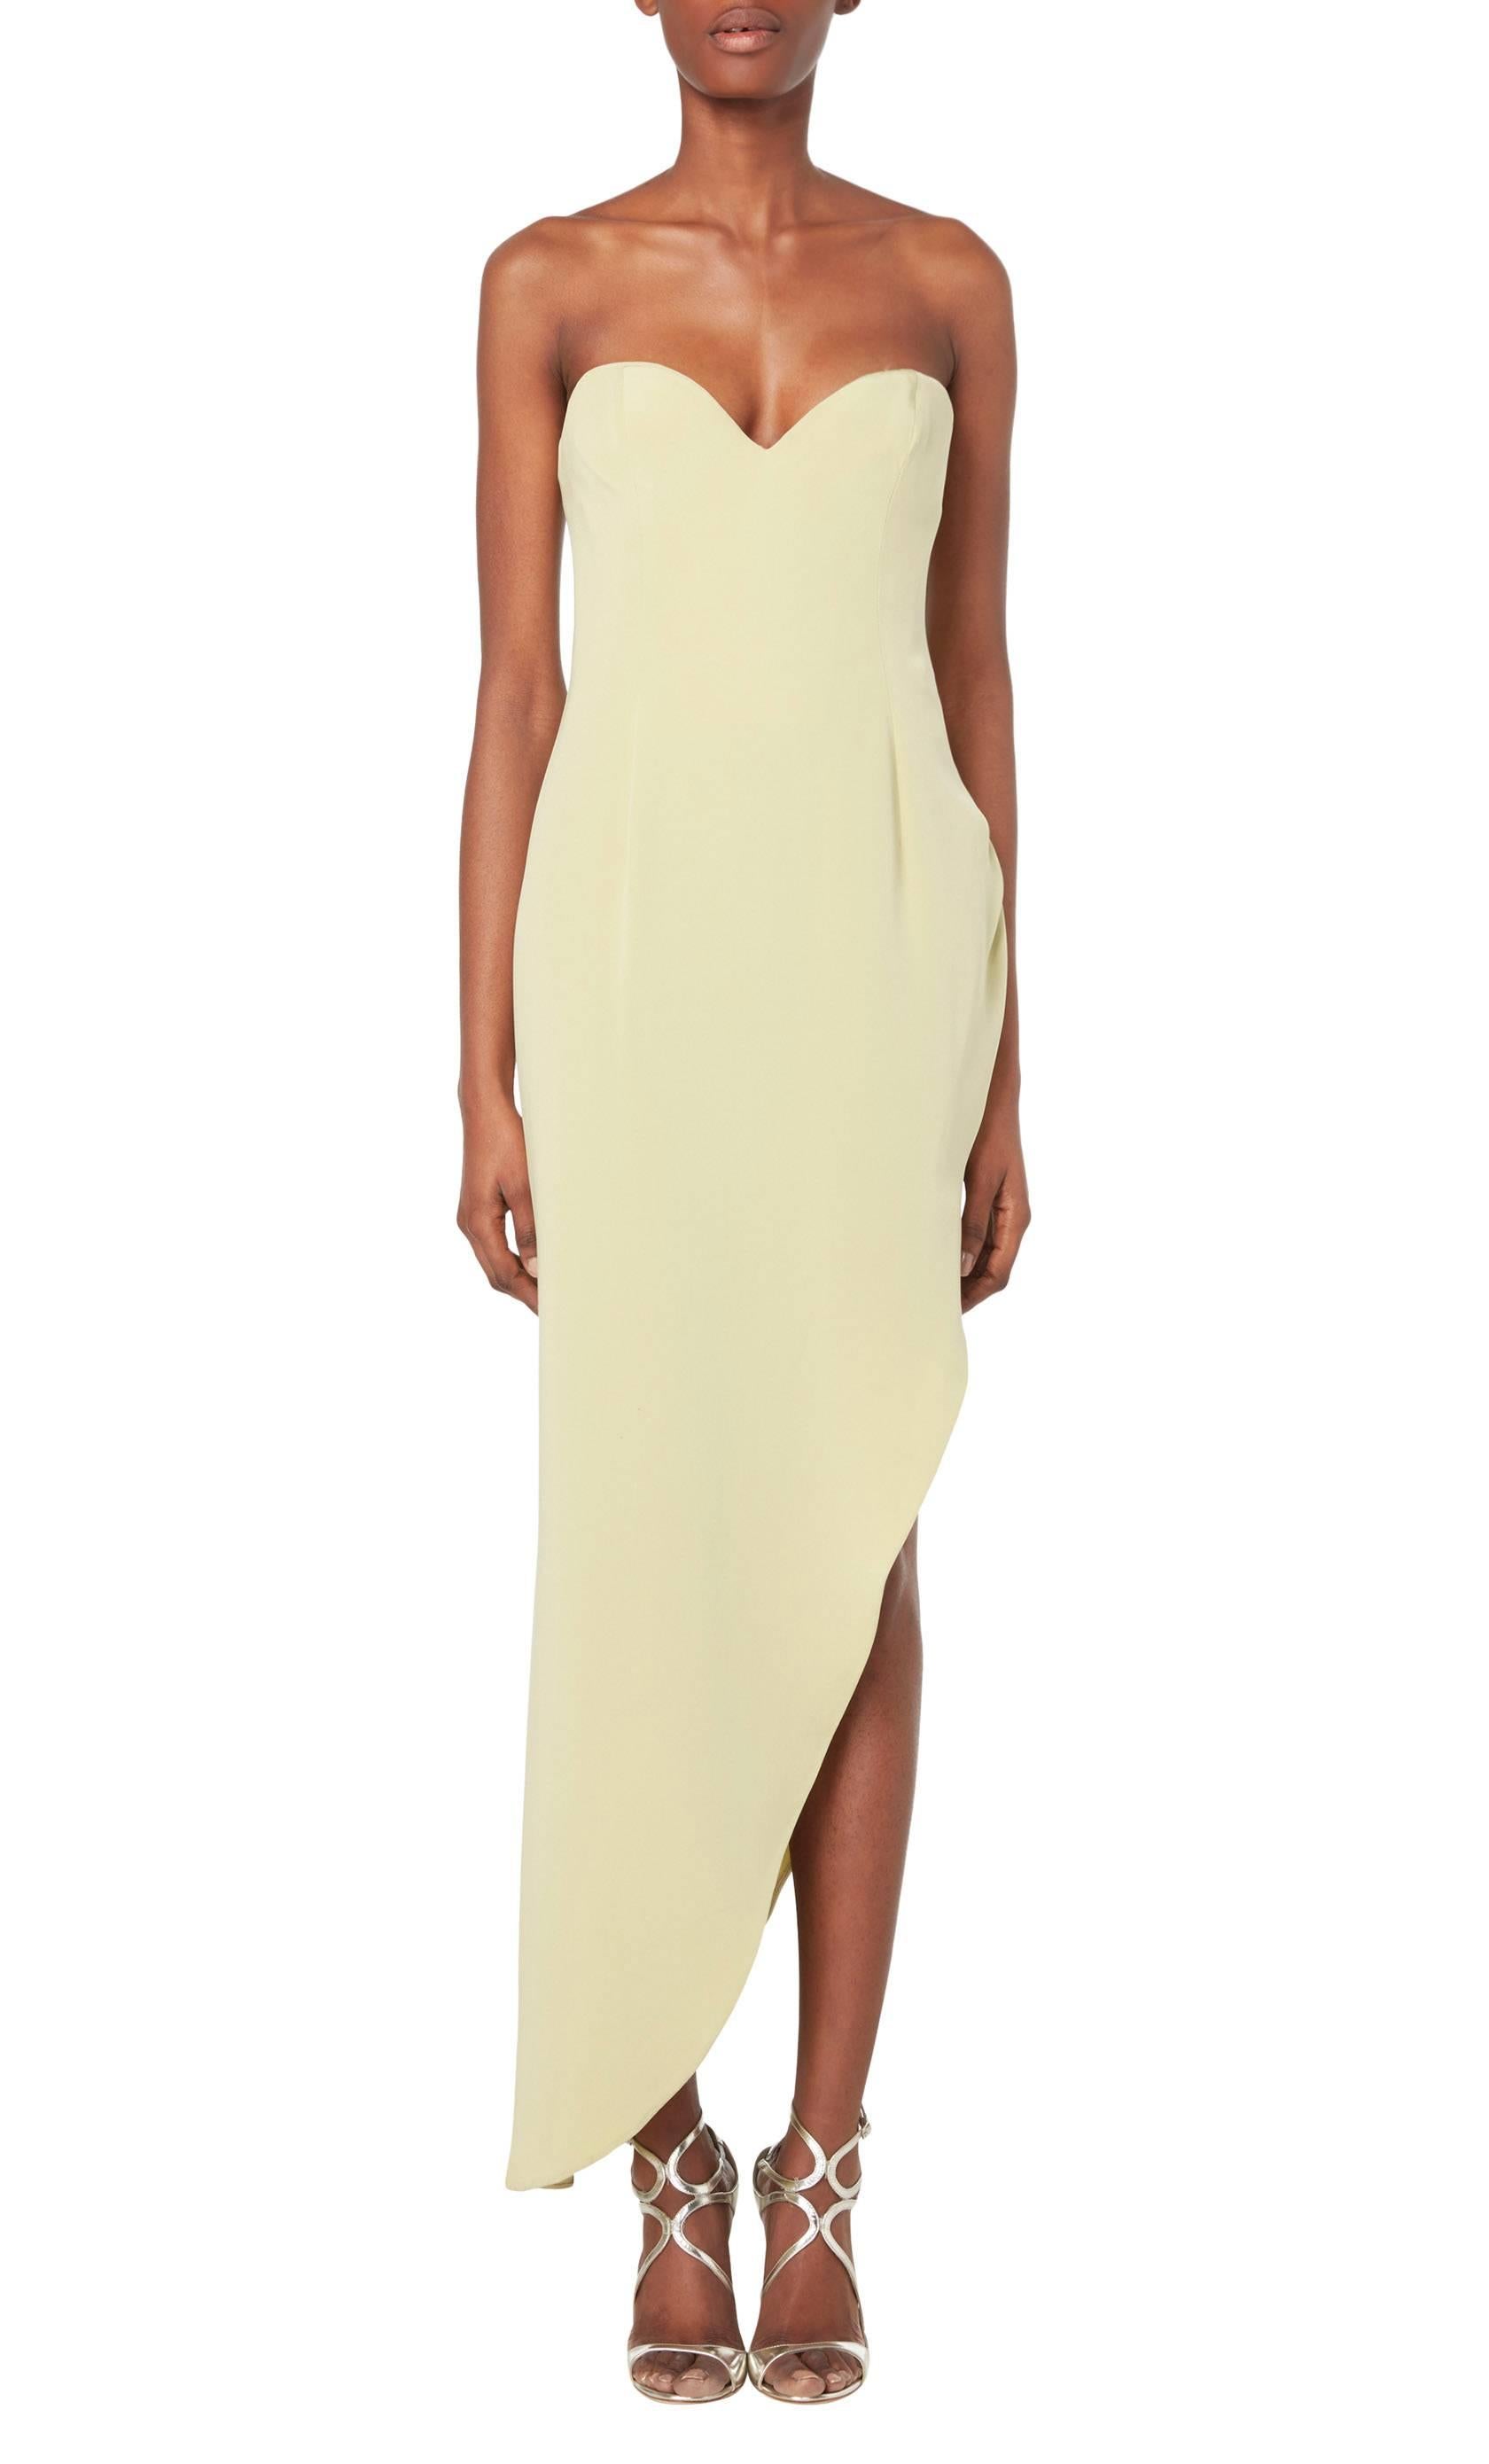 Constructed in pale green silk, this Fiandaca evening dress is incredibly sexy! Strapless, with a sweetheart neckline, the fabric skims the body seductively, falling into an asymmetric cut at the hem. Finish the look with a pair of killer heels and